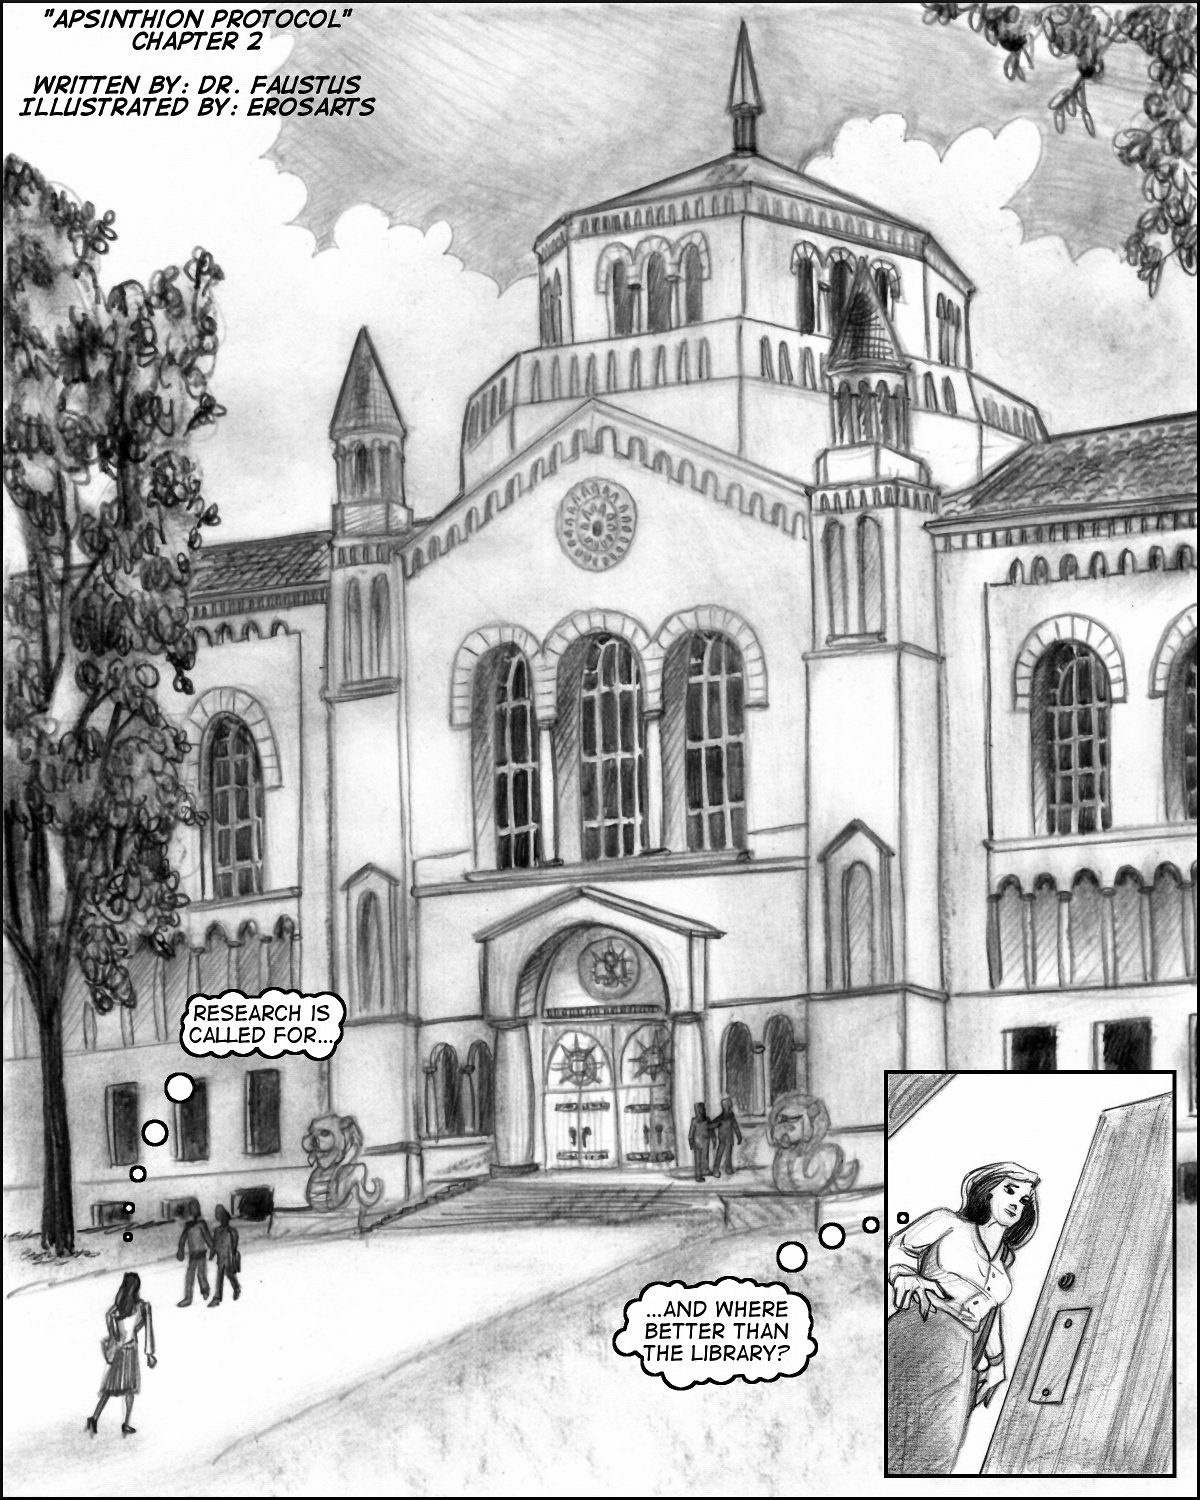 Splash panel for Chapter Two, showing the Gnosis College Library